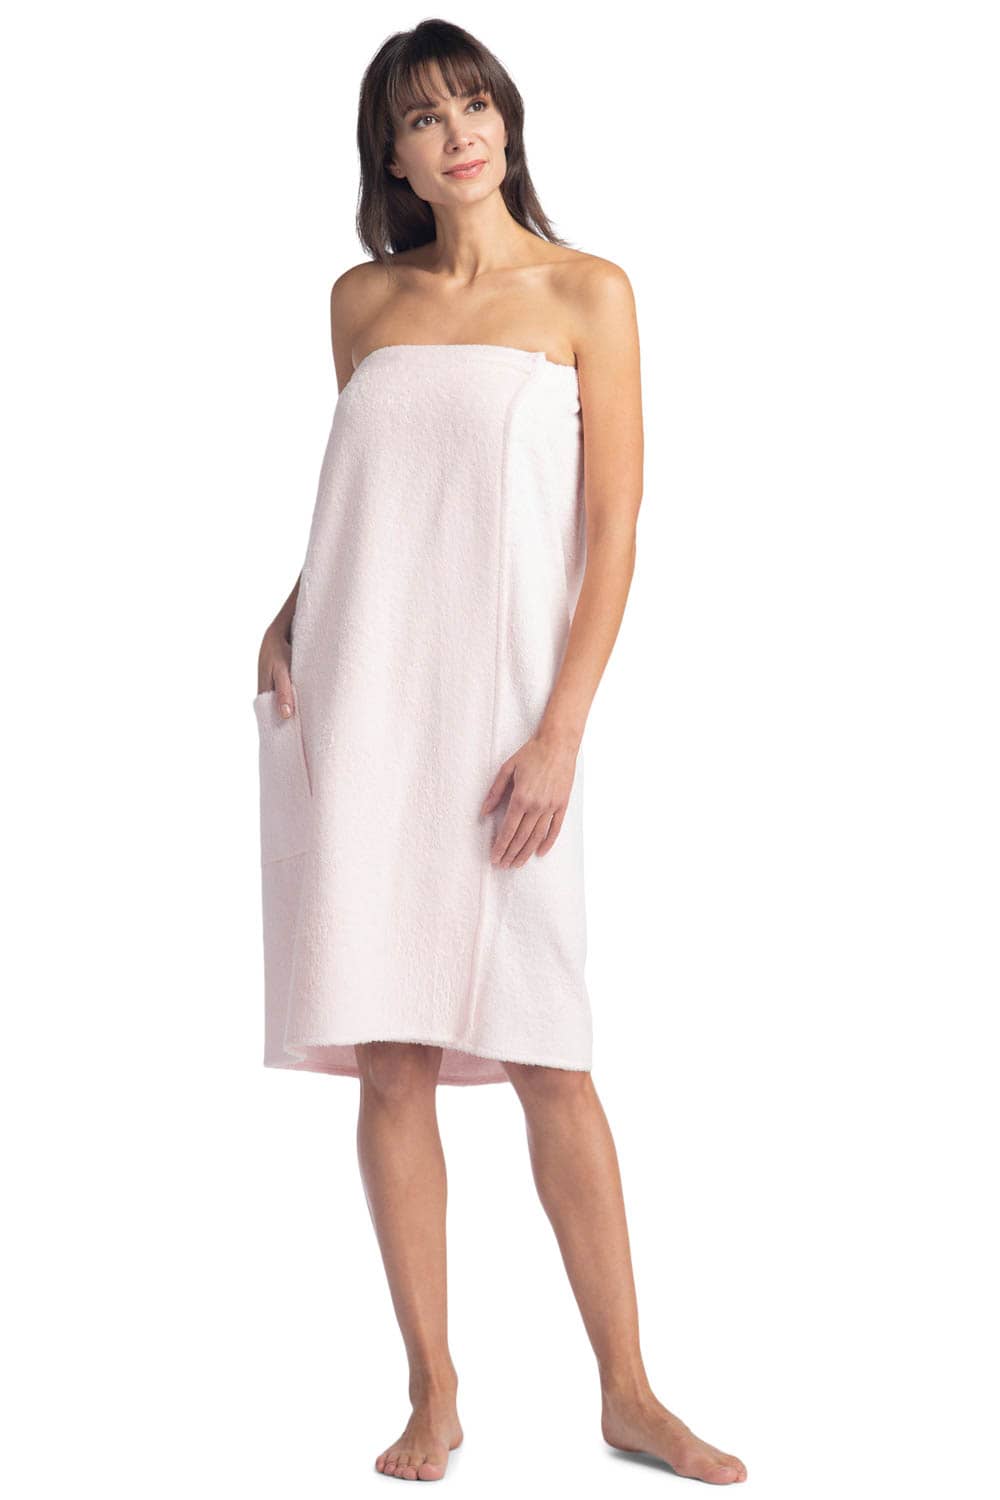 Fishers Finery Women's EcoFabric Resort Style Spa Wrap; Terry Cloth